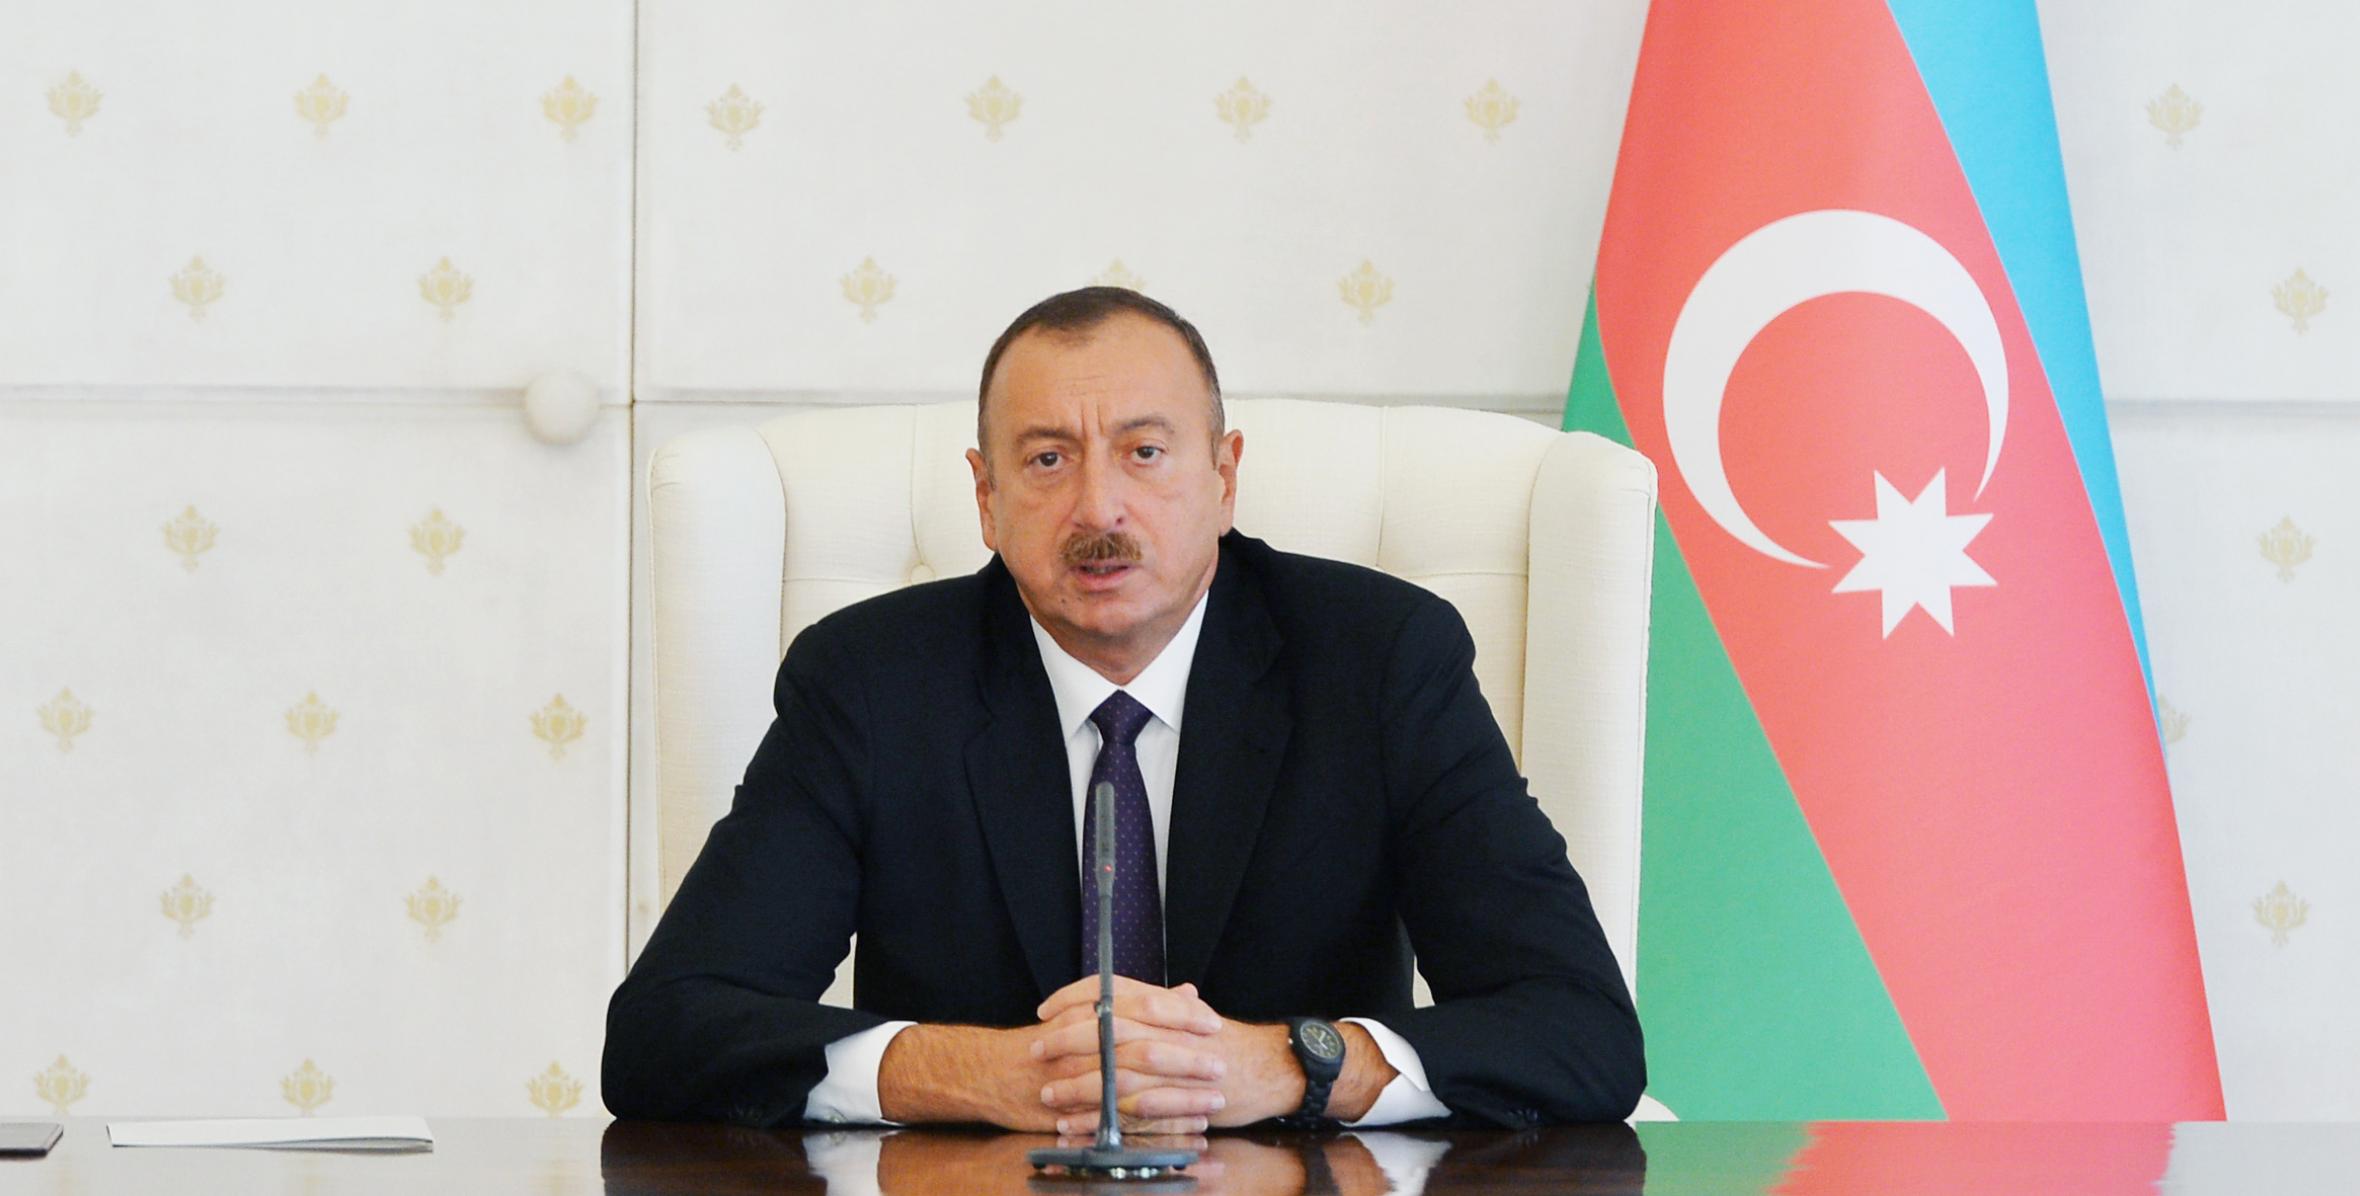 Ilham Aliyev chaired the first meeting of the Organizing Committee of the 4th Islamic Solidarity Games